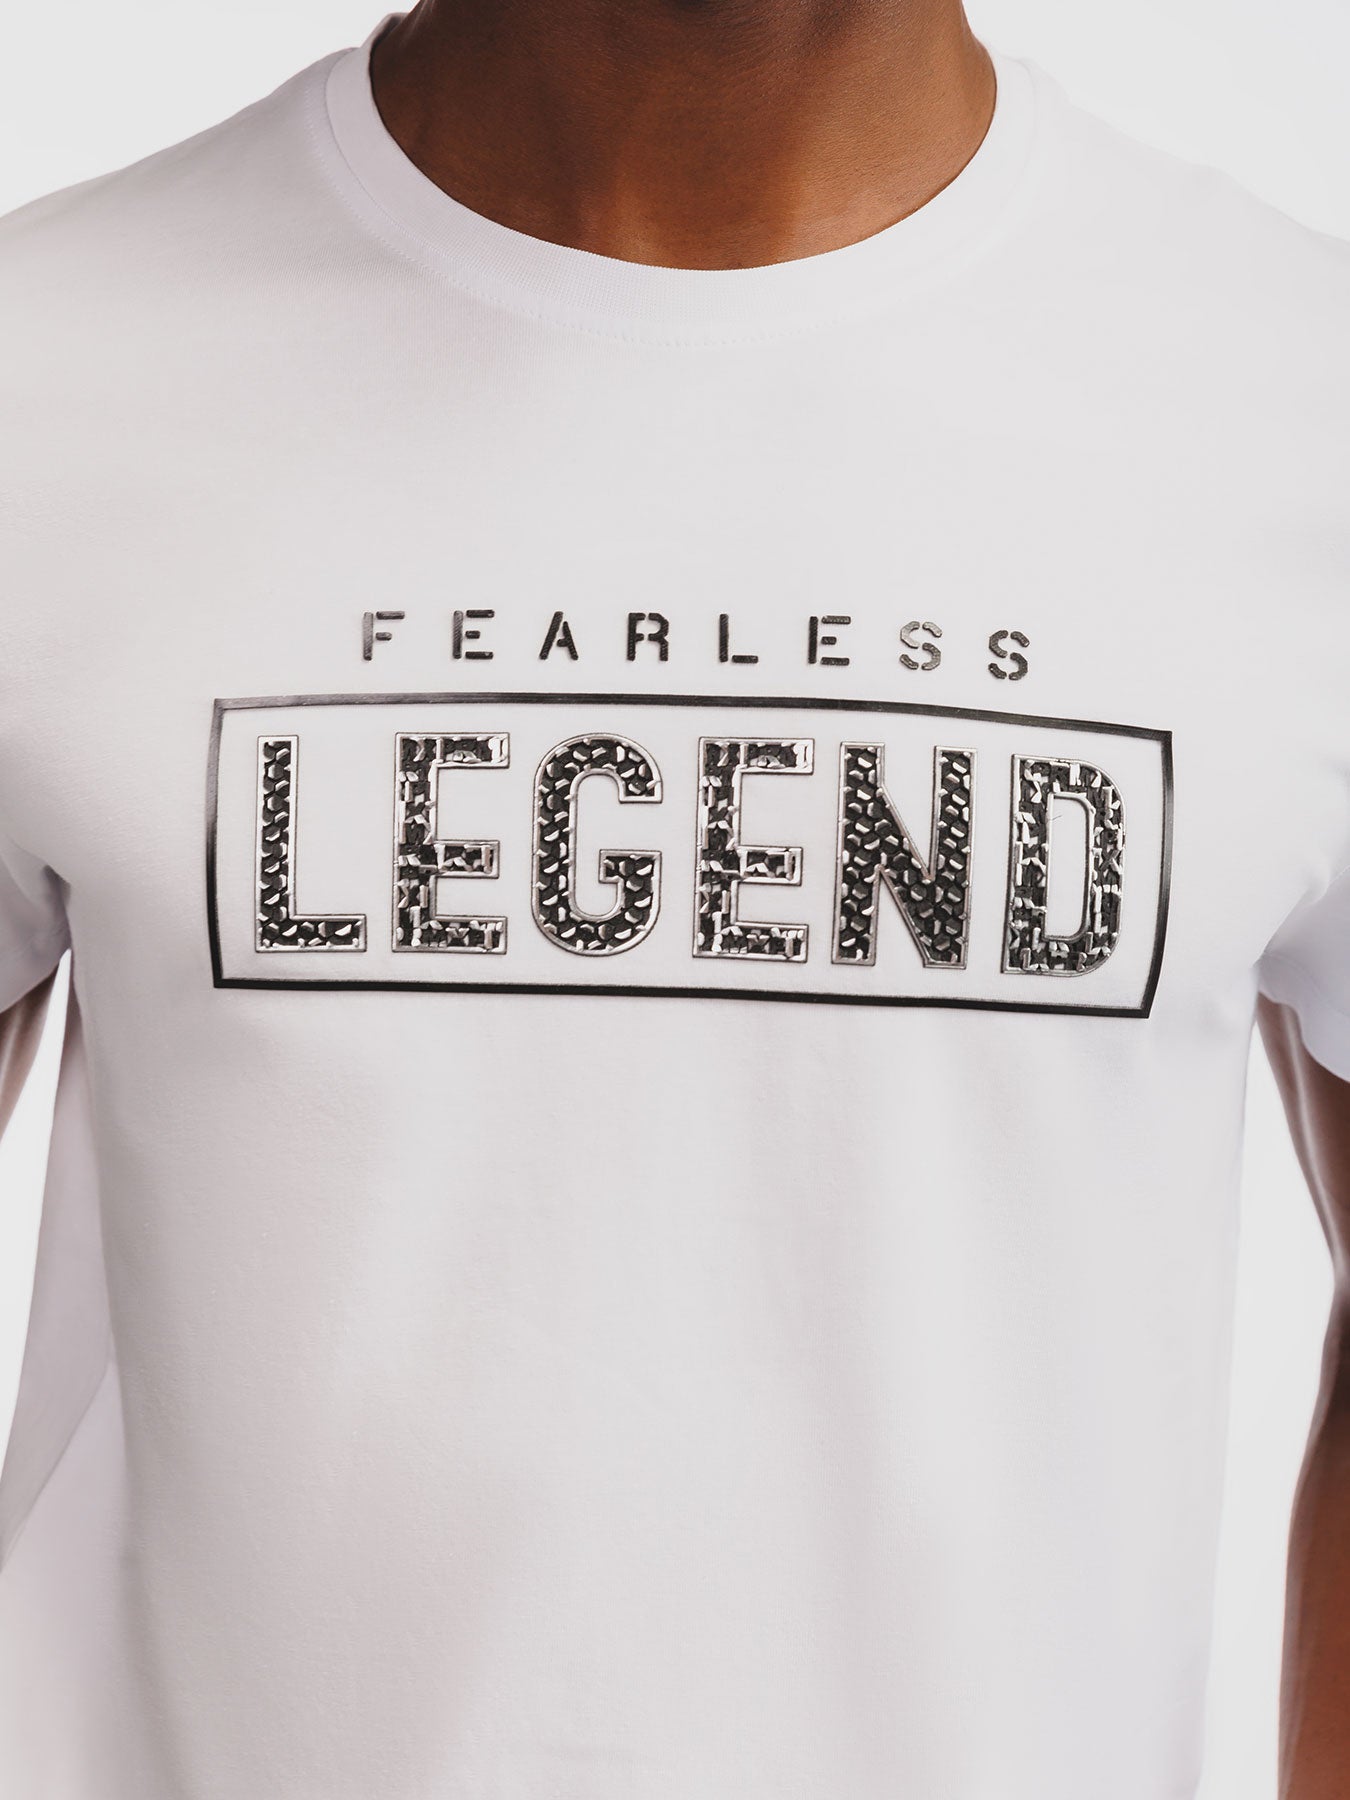 "Fearless Legend" Graphic Tee